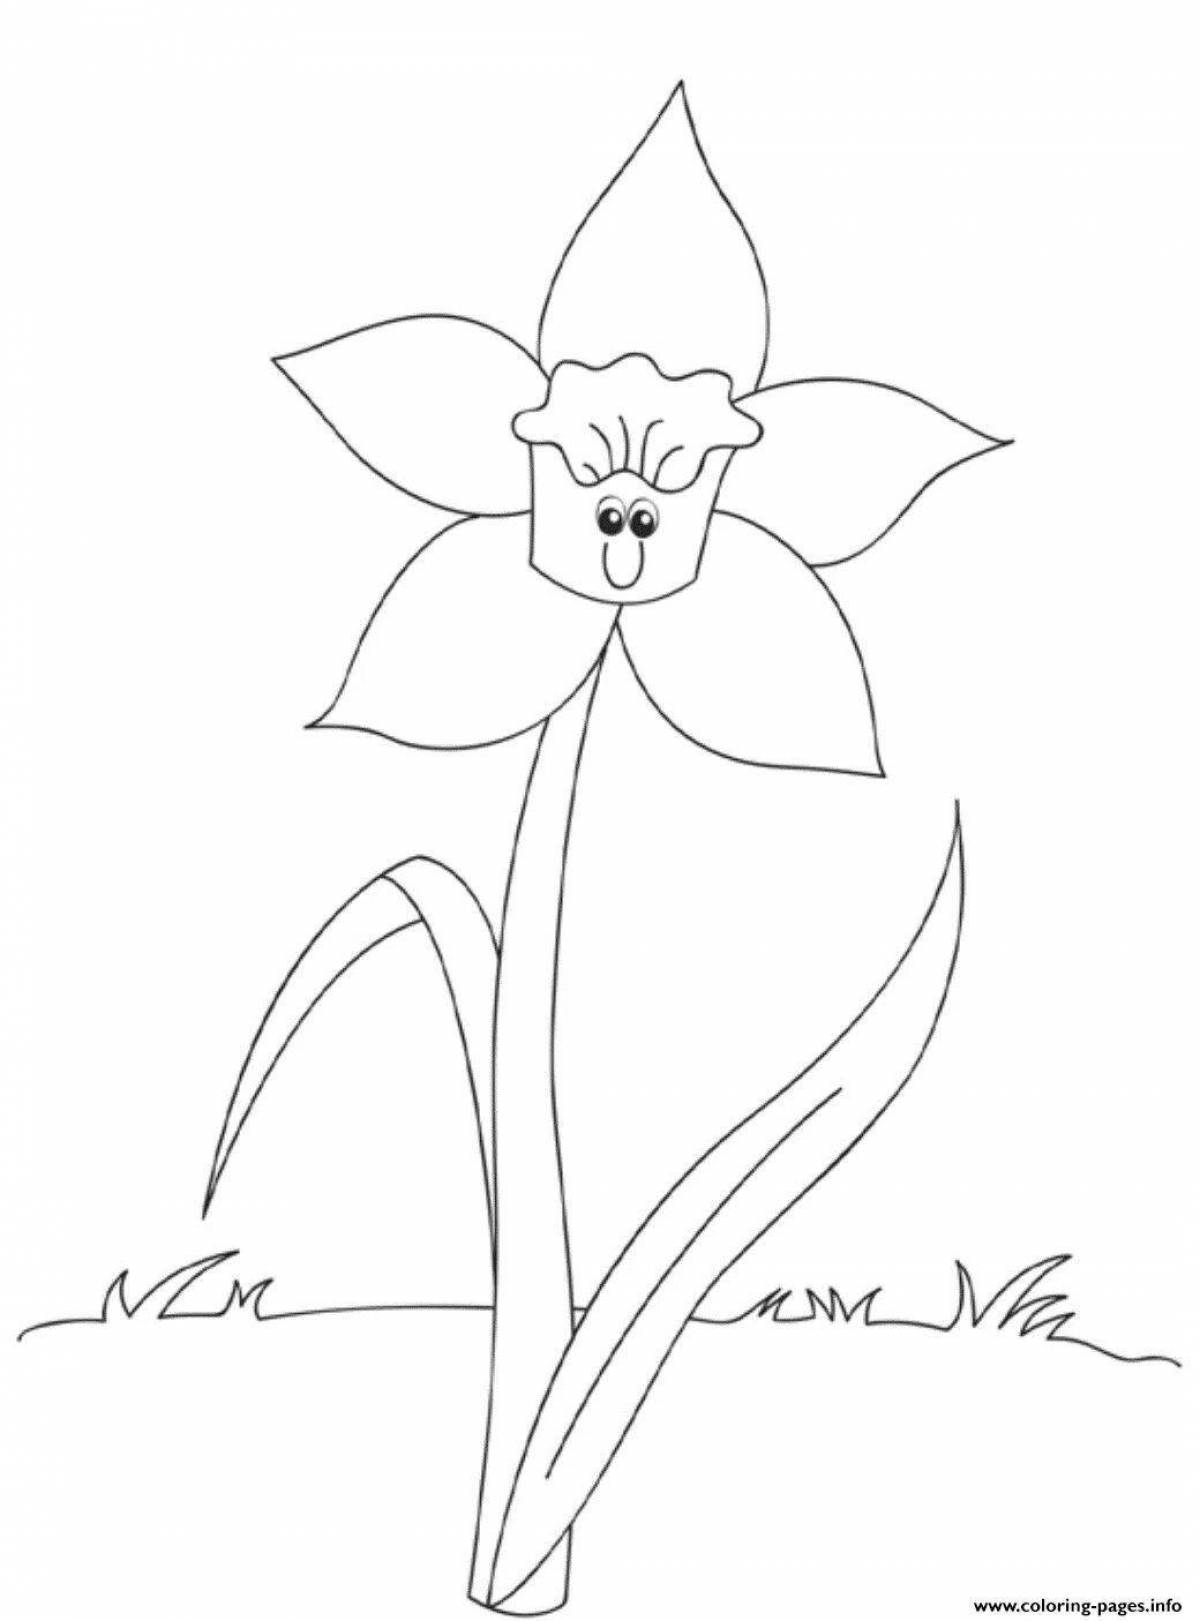 Coloring book beautiful narcissus flower